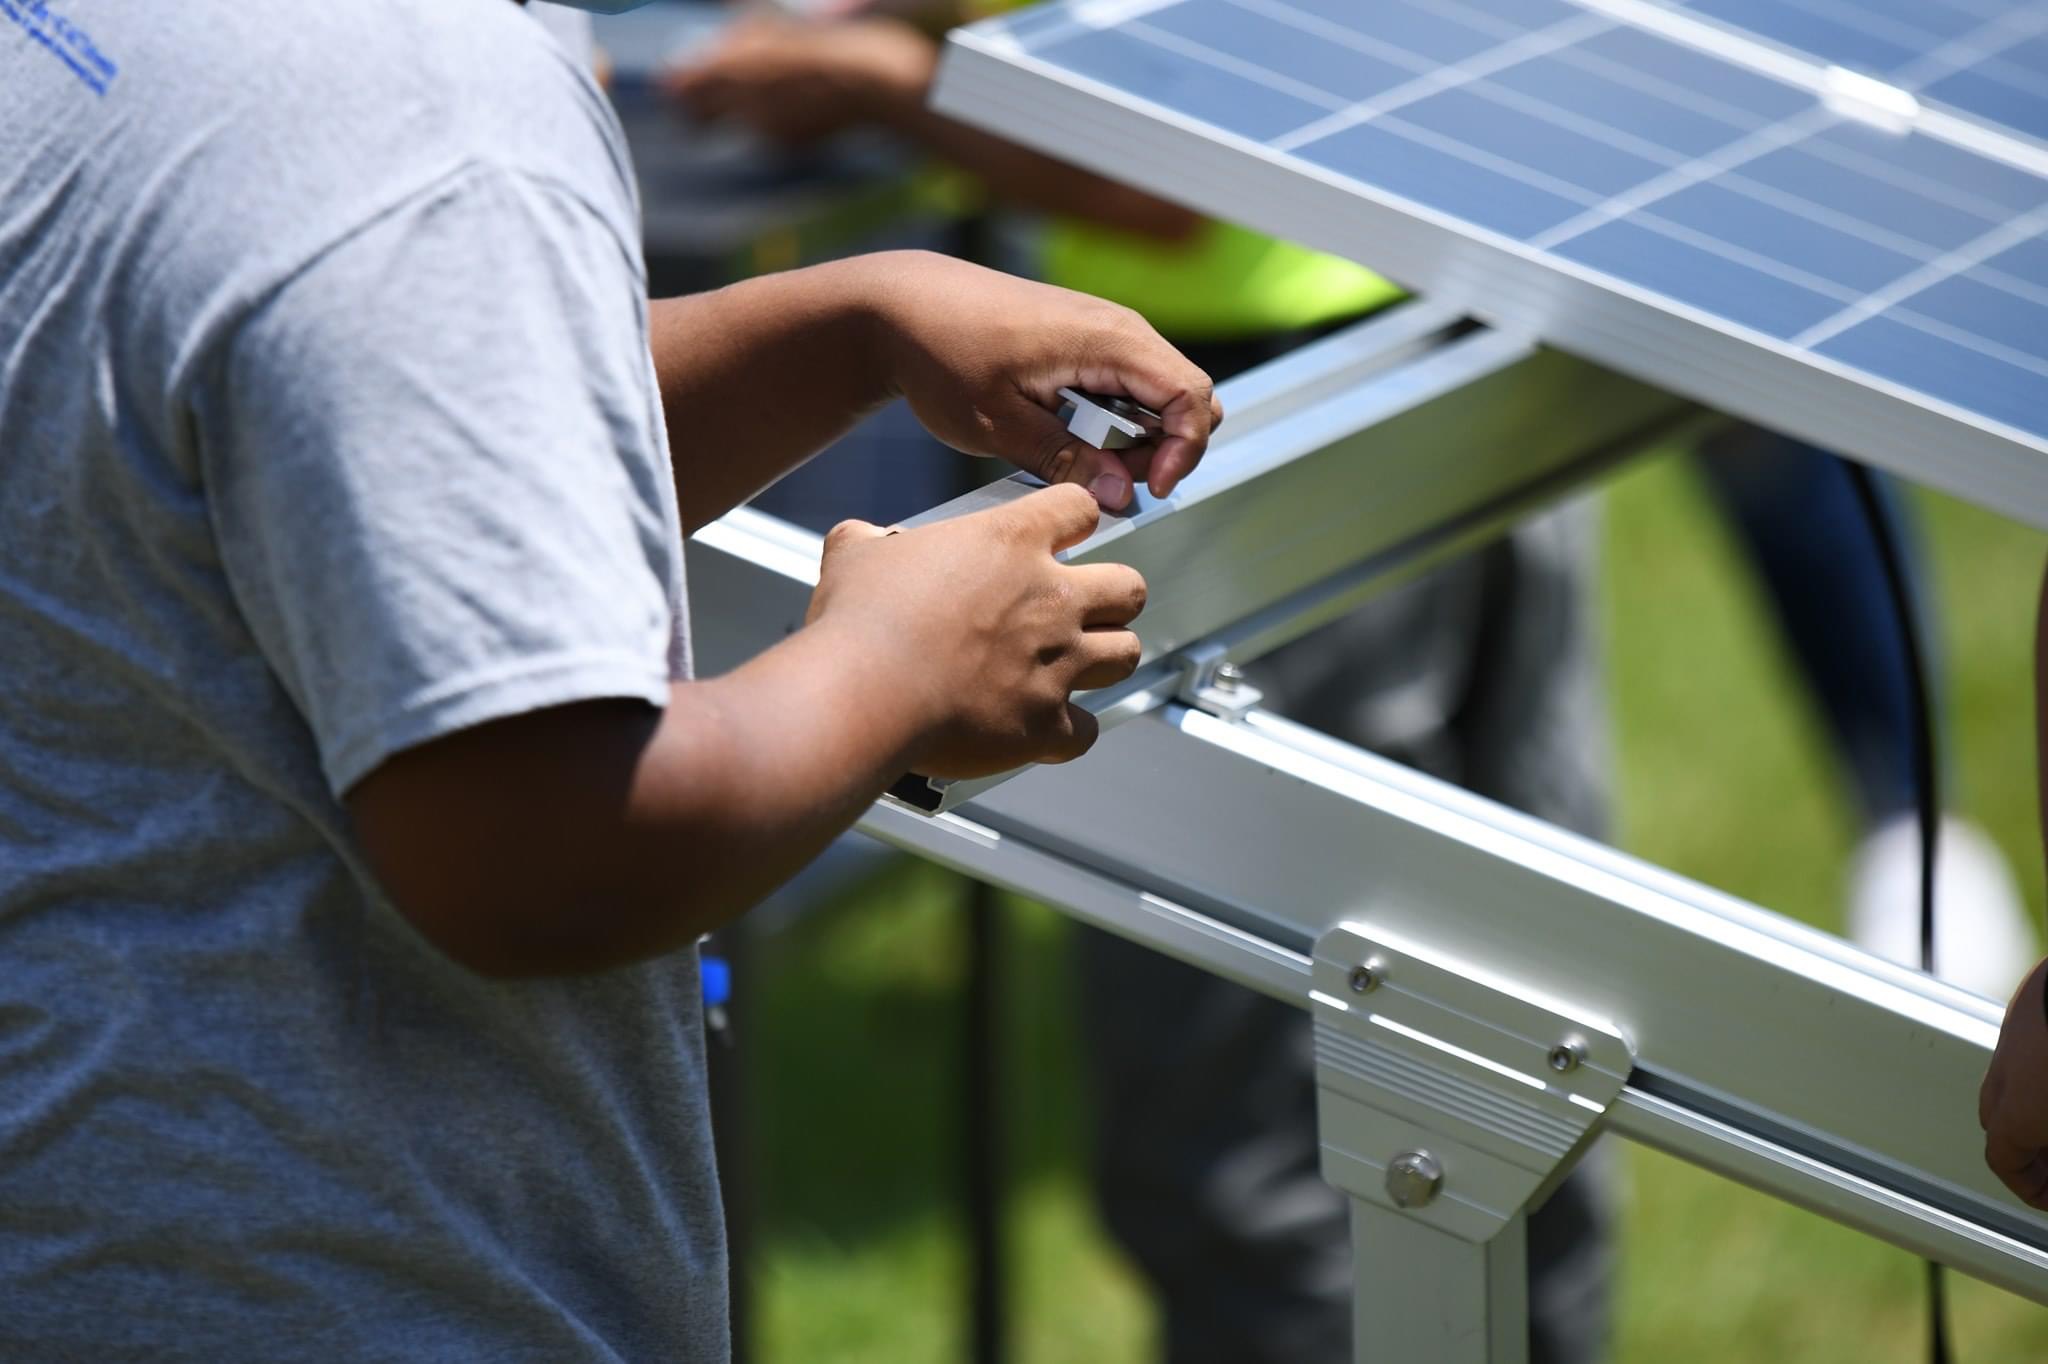 An anonymous person’s torso is shown as they adjust the structure holding up a solar panel.